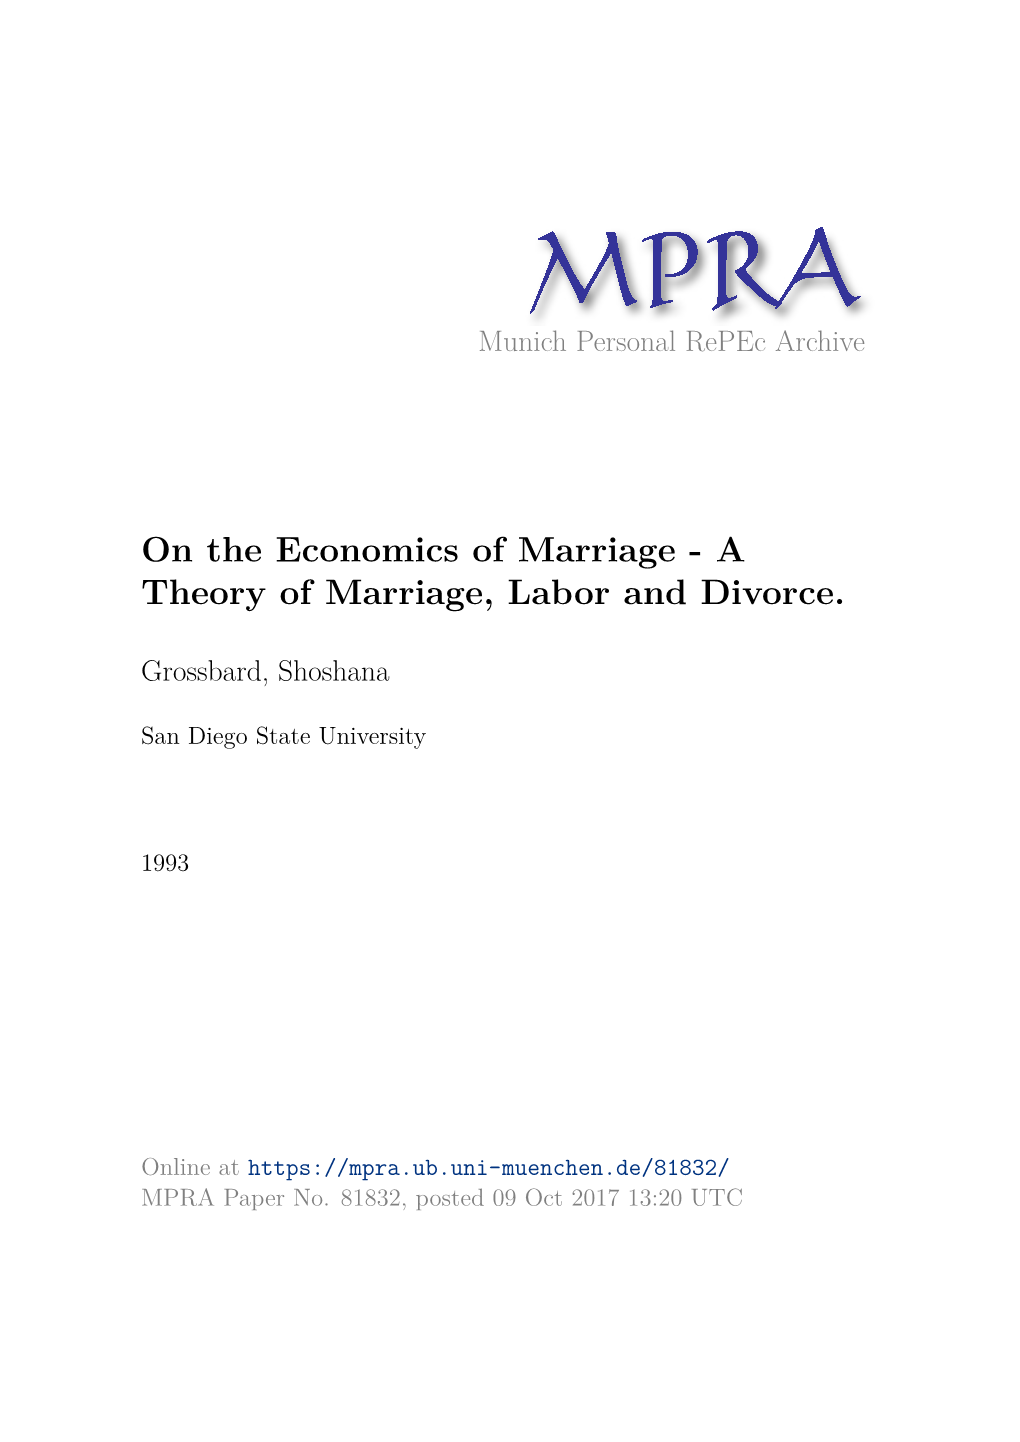 A Theory of Marriage, Labor and Divorce